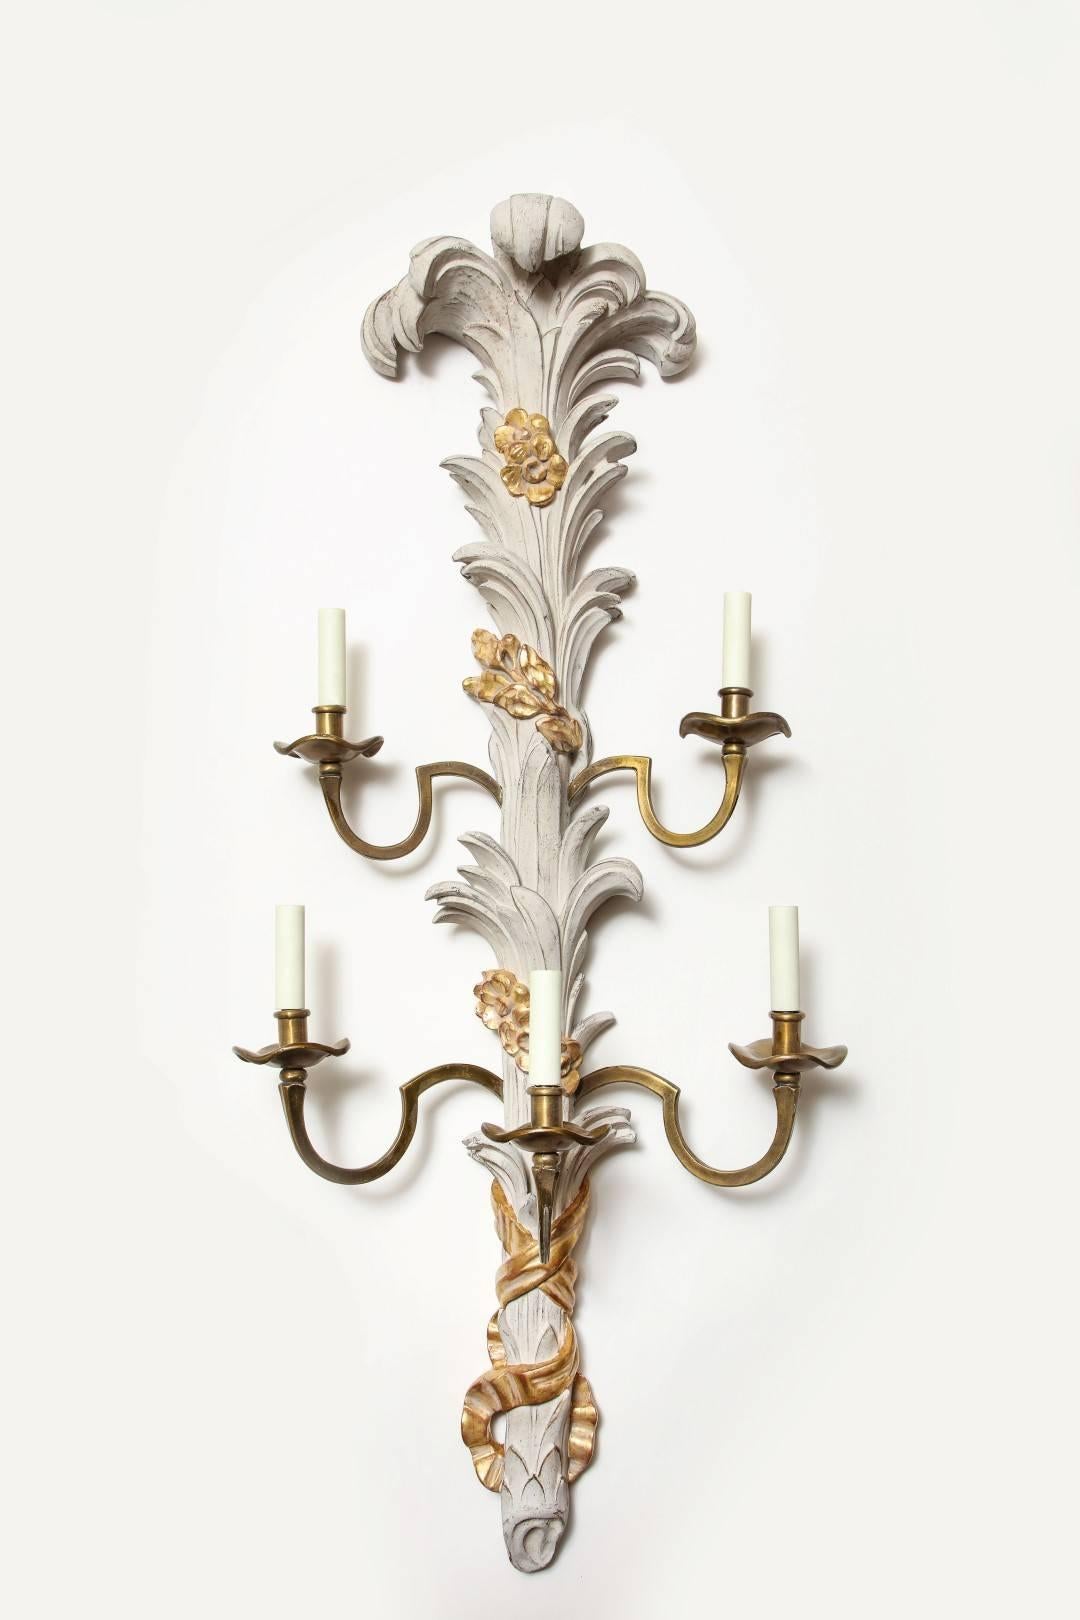 A pair of parcel-gilt, grey painted wall sconces by David Duncan. The hand carved large backplate is based on a design from the 1950s, features a gilt finish and five brass candle arms with standard wiring.
Priced per pair, with two pairs currently